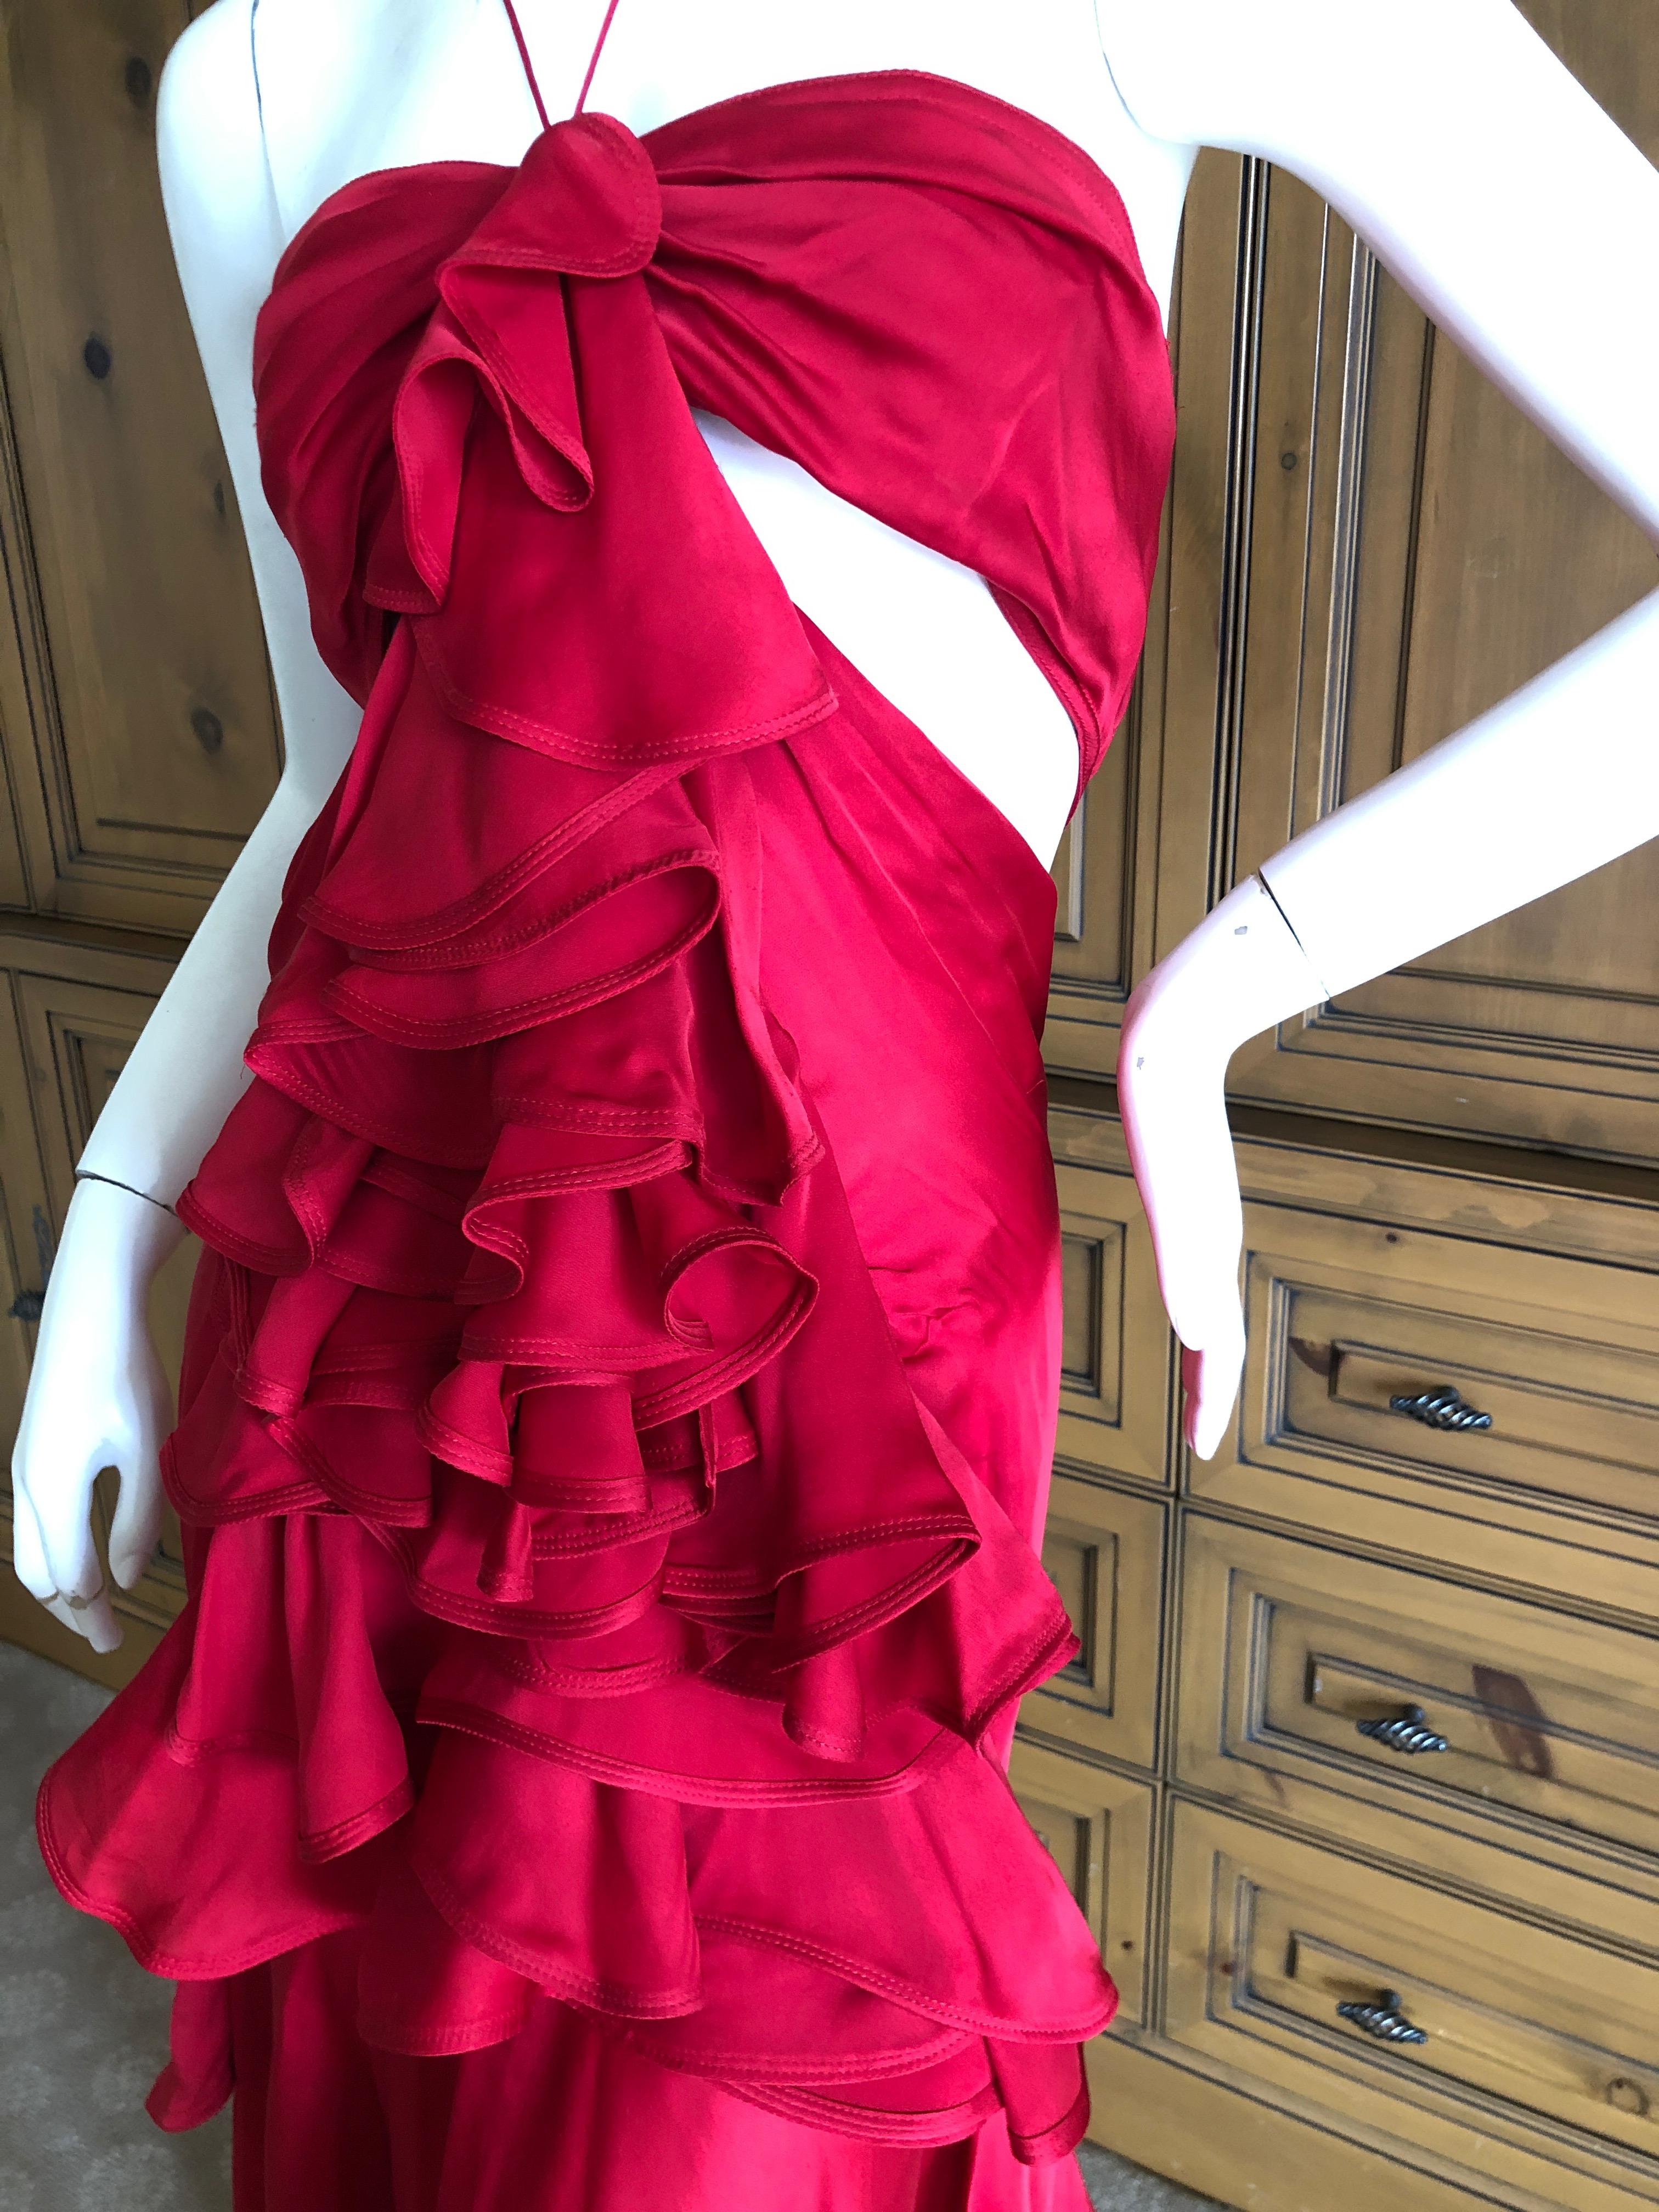 Yves Saint Laurent by Tom Ford 2003 Ruffled Red Silk Dress  For Sale 5